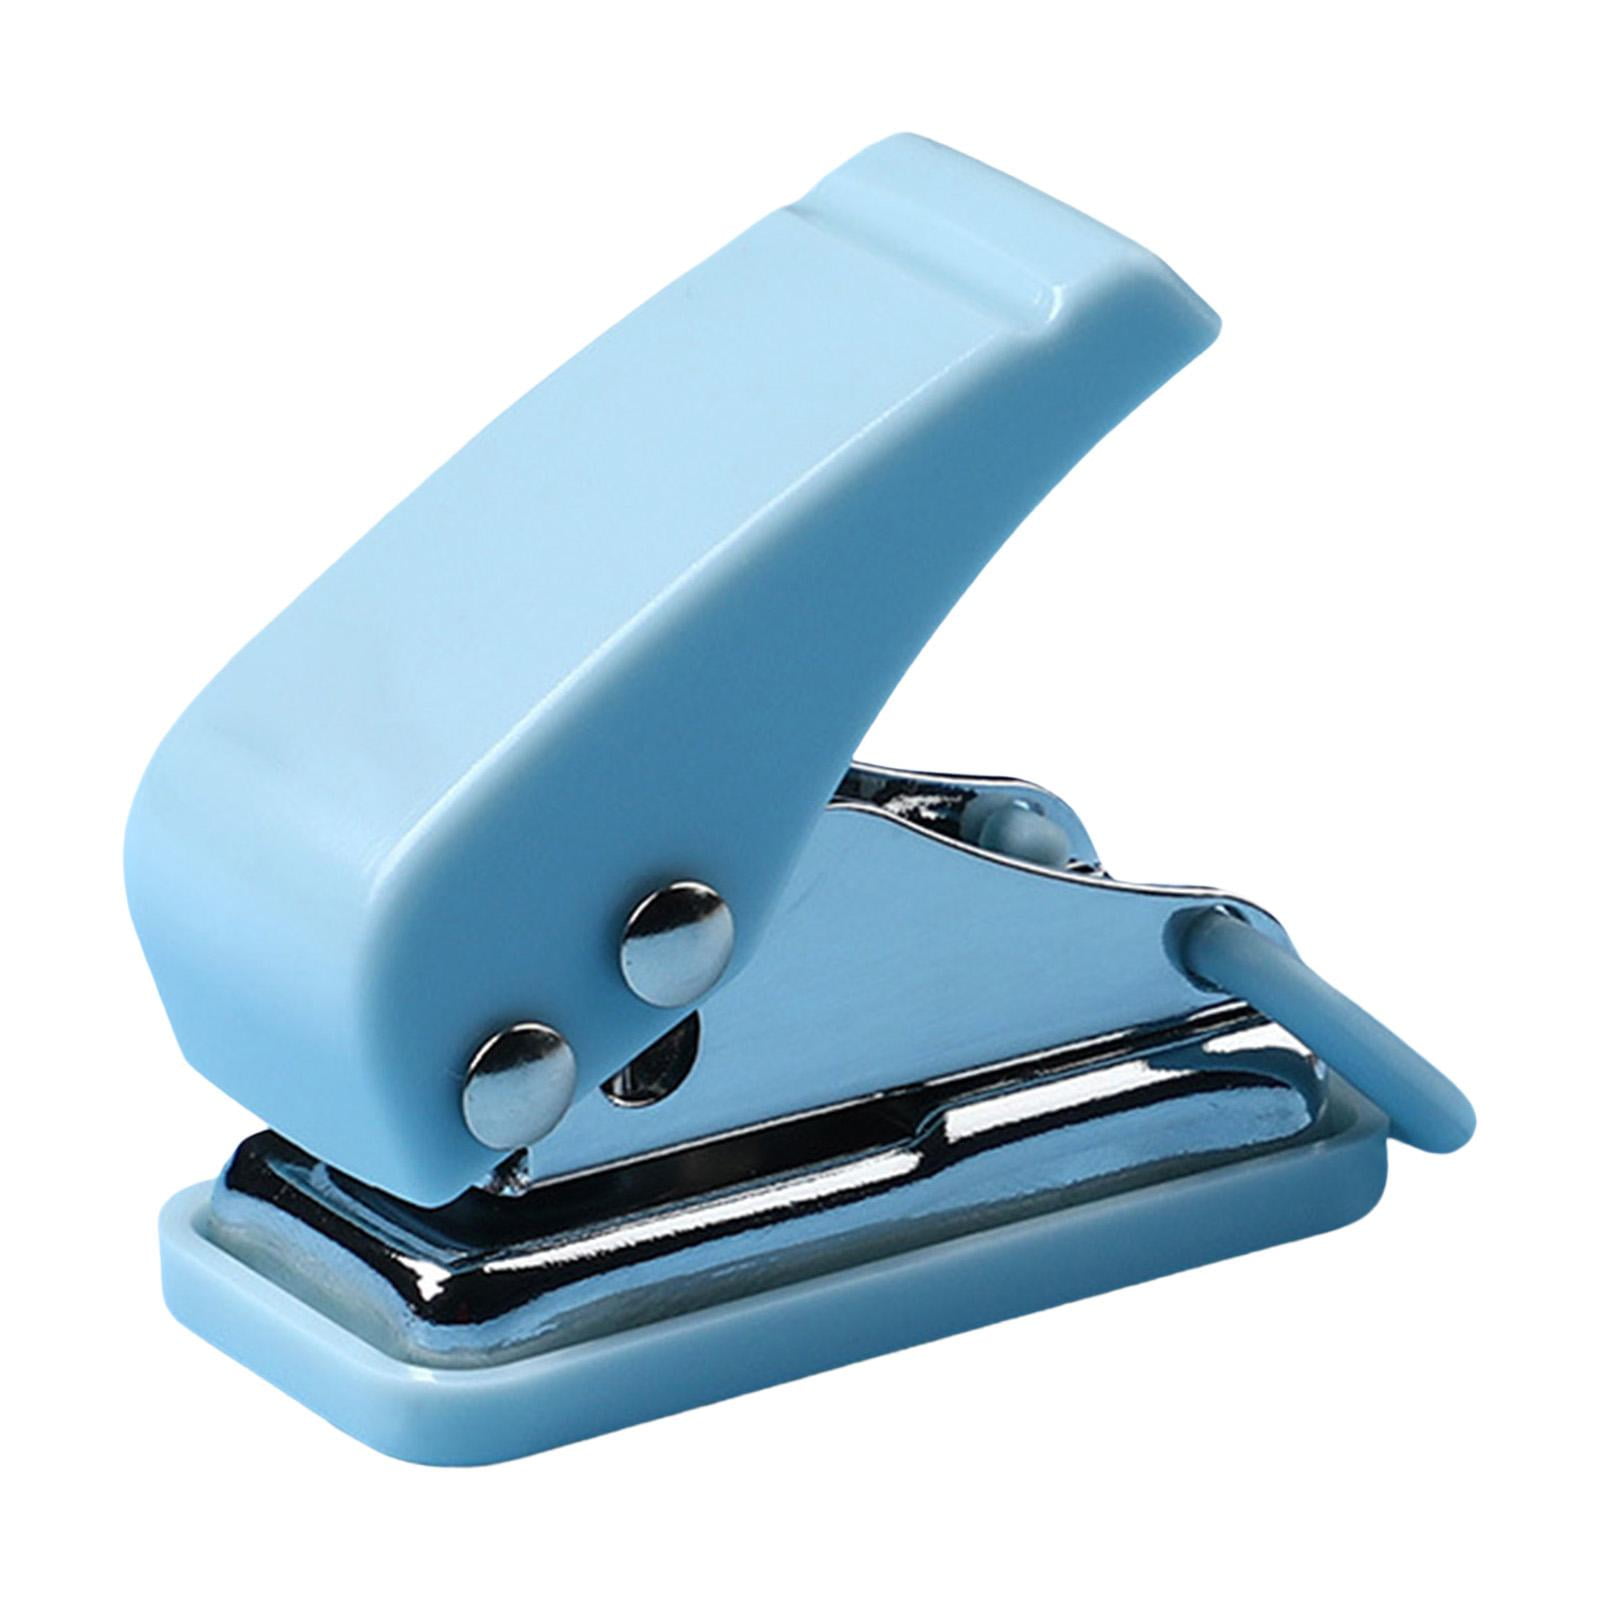 Hutou Single Handheld 1/4 Inches Hole Punch, 20 Sheet Paper Hole